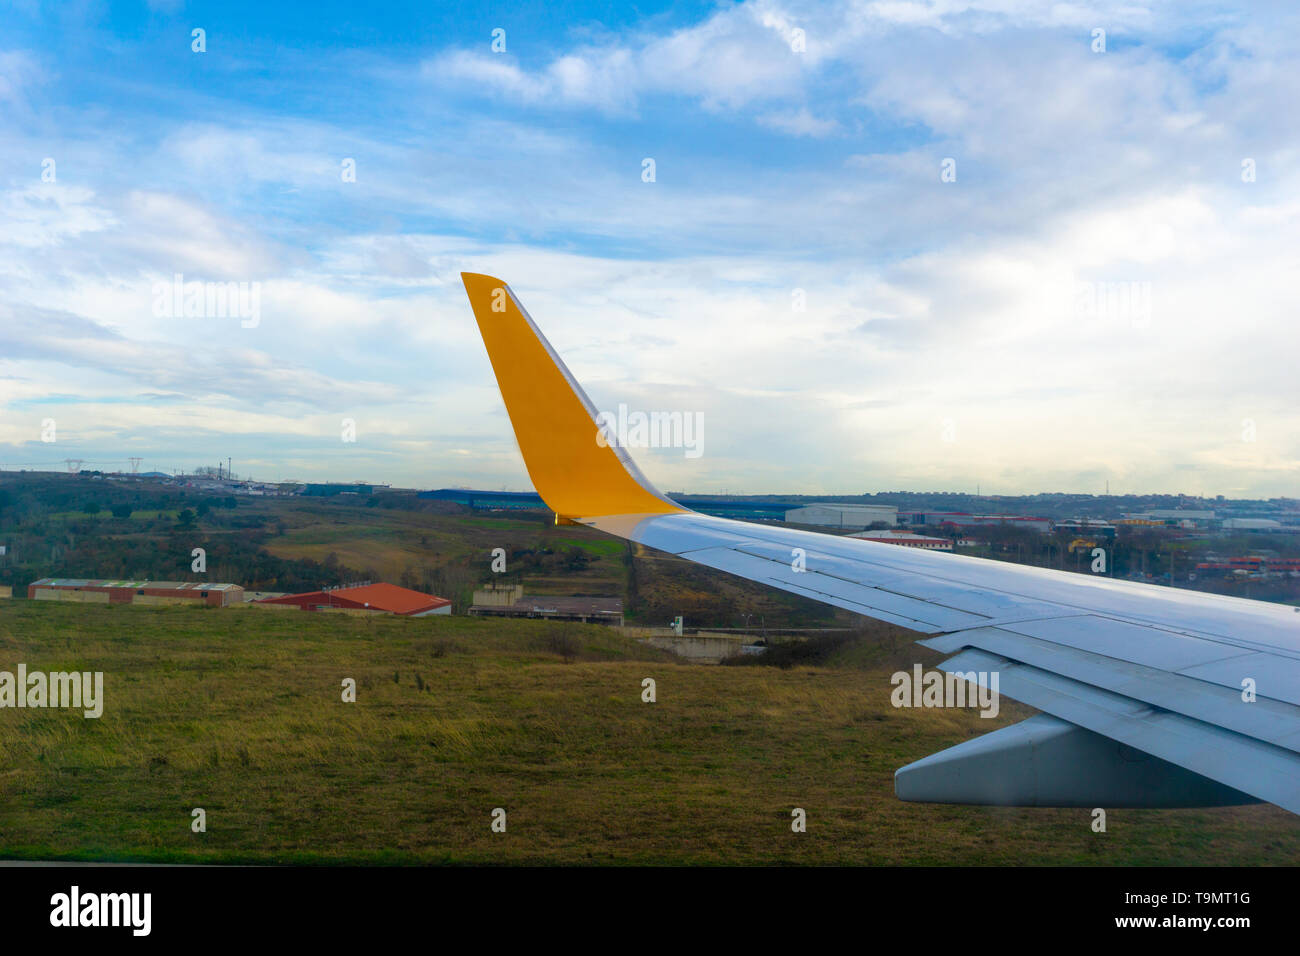 Green grassland seen through window of an taxiing aircraft, airplane wing from window. Stock Photo